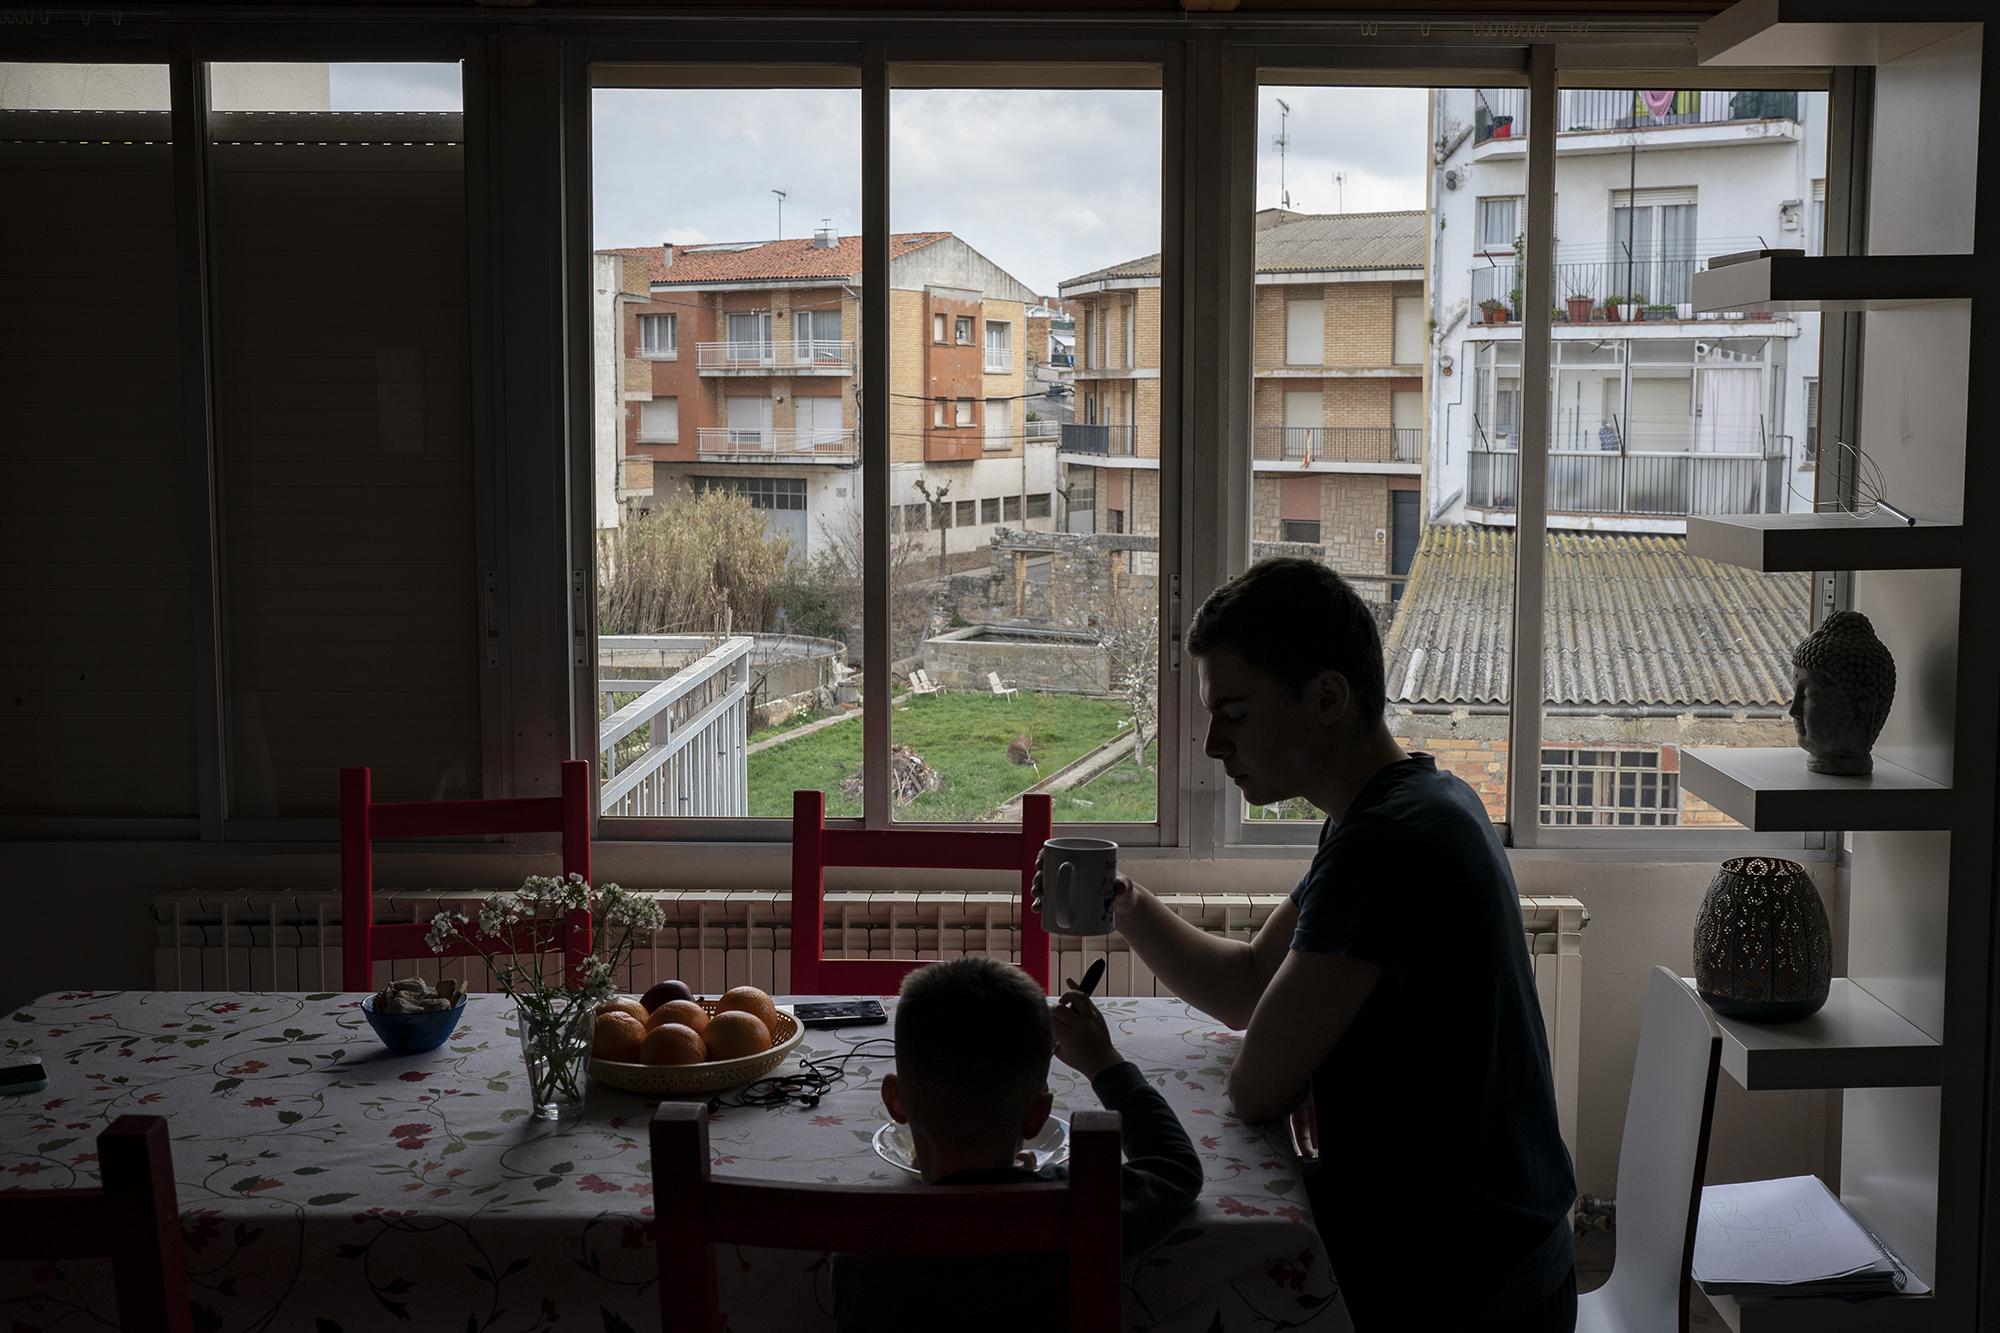 Maxym Batrak, 5, from Brovary and Max Slobodianiuk, 17, from Dnipro, have lunch in a house in the village of Guissona, Lleida, Spain, Tuesday, March 22, 2022. (AP Photo/Joan Mateu Parra)